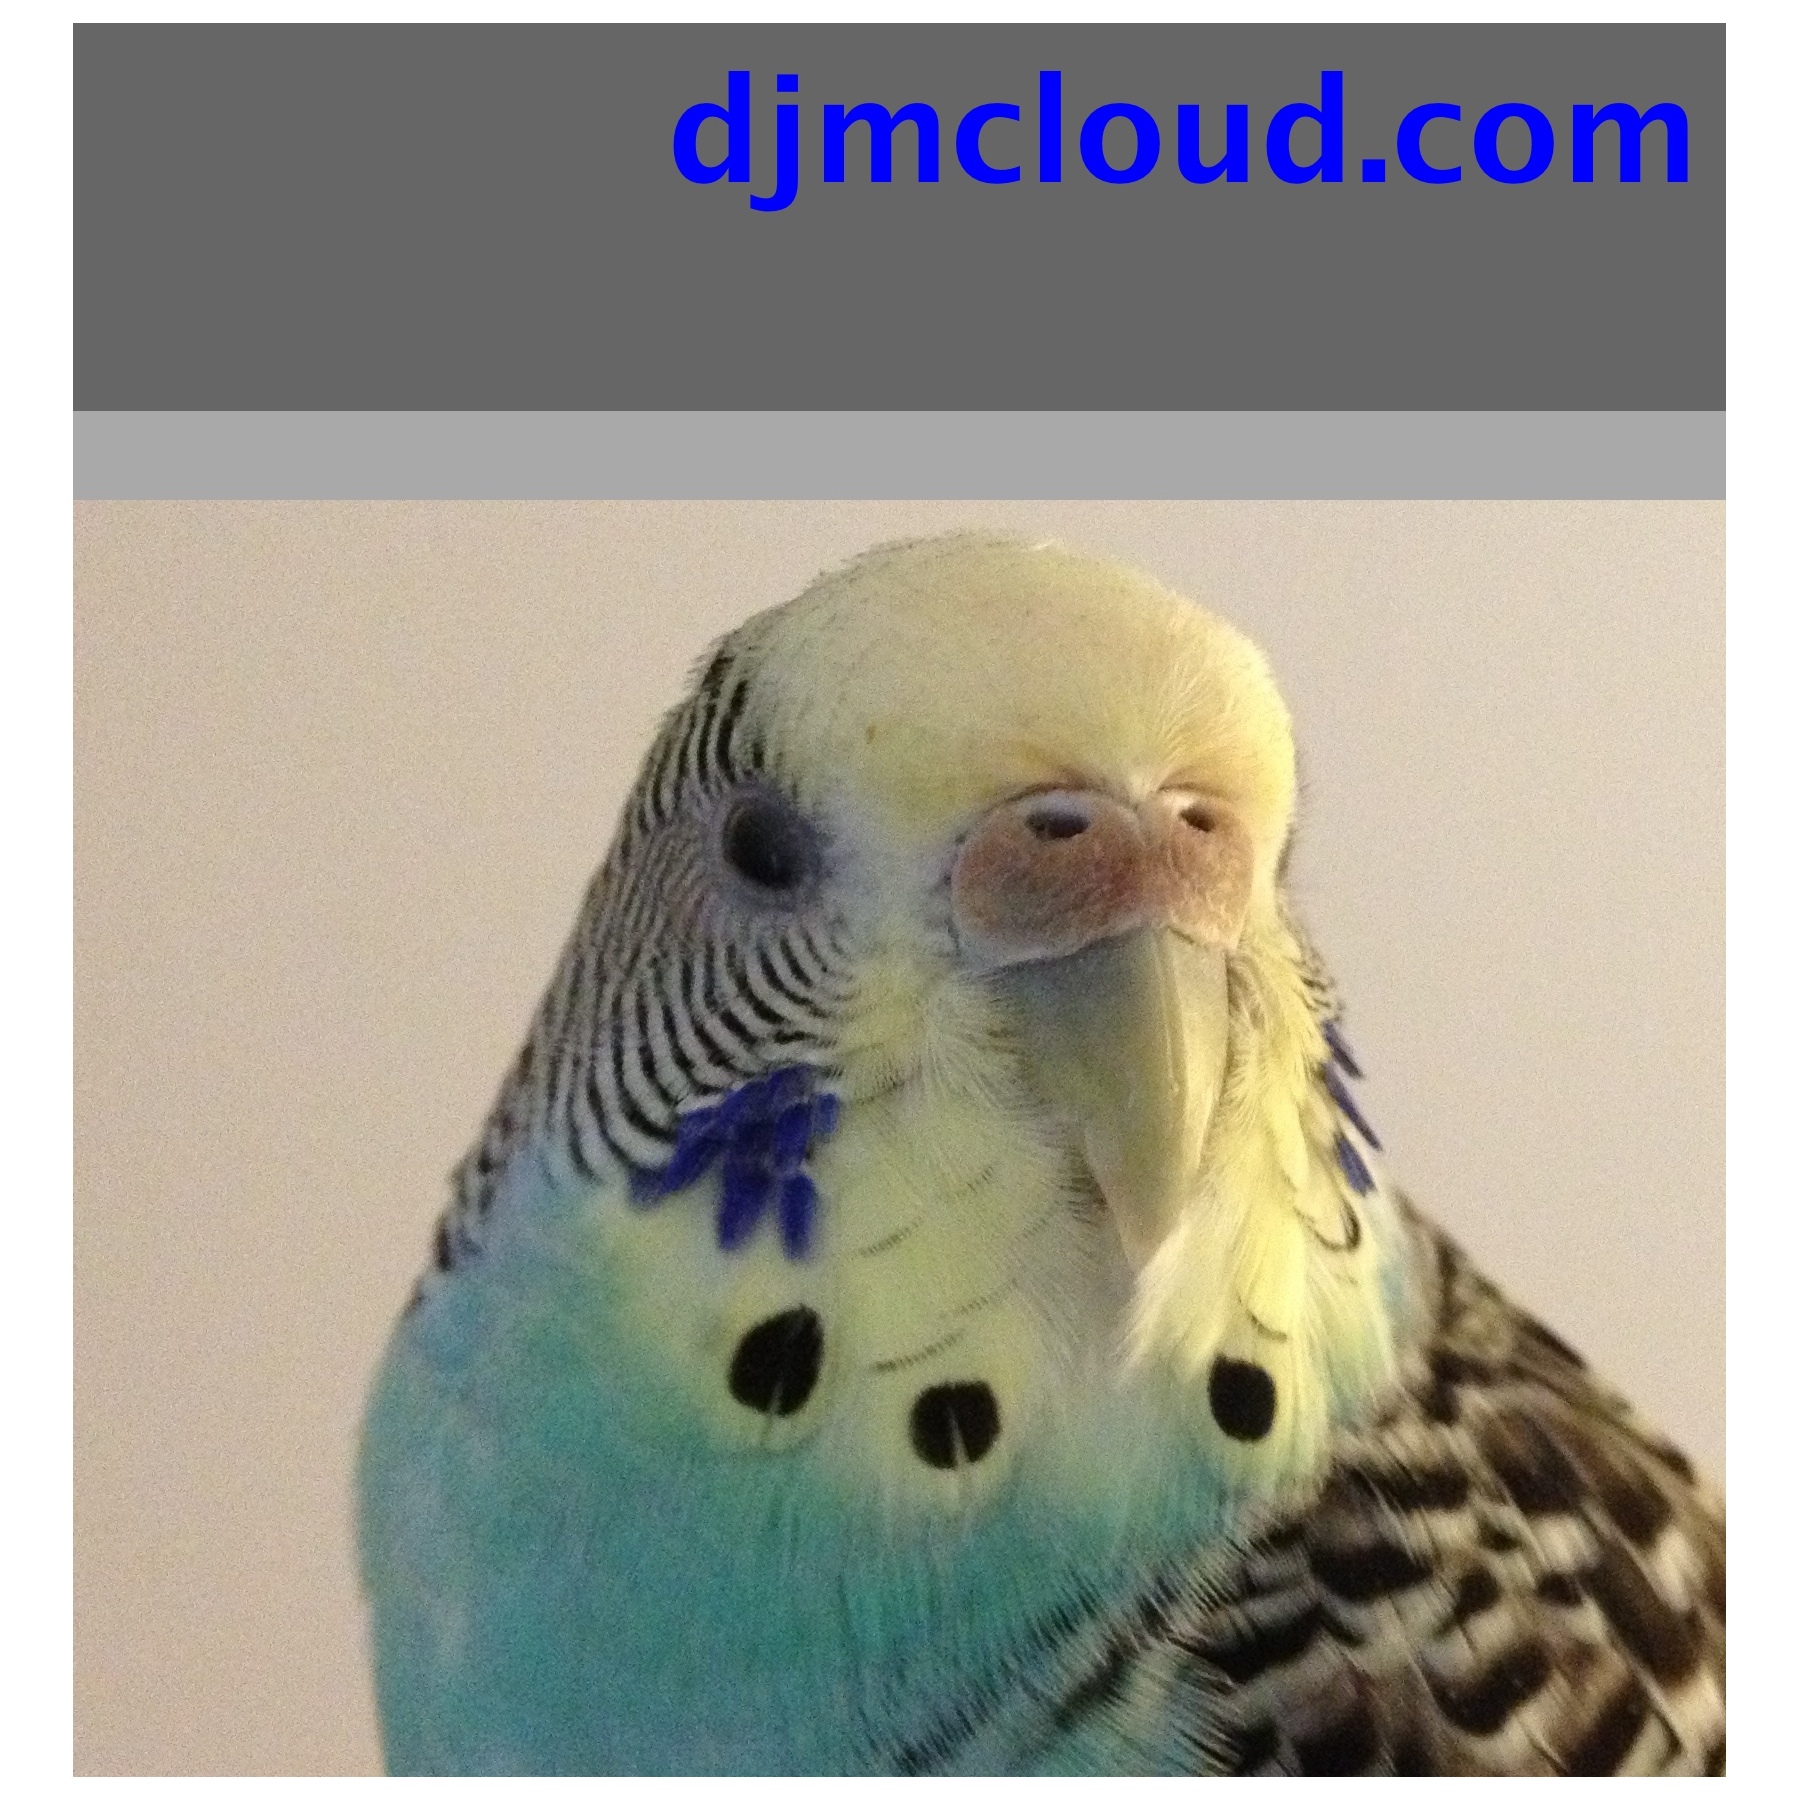 Belle is the star of the new djmcloud.com artwork